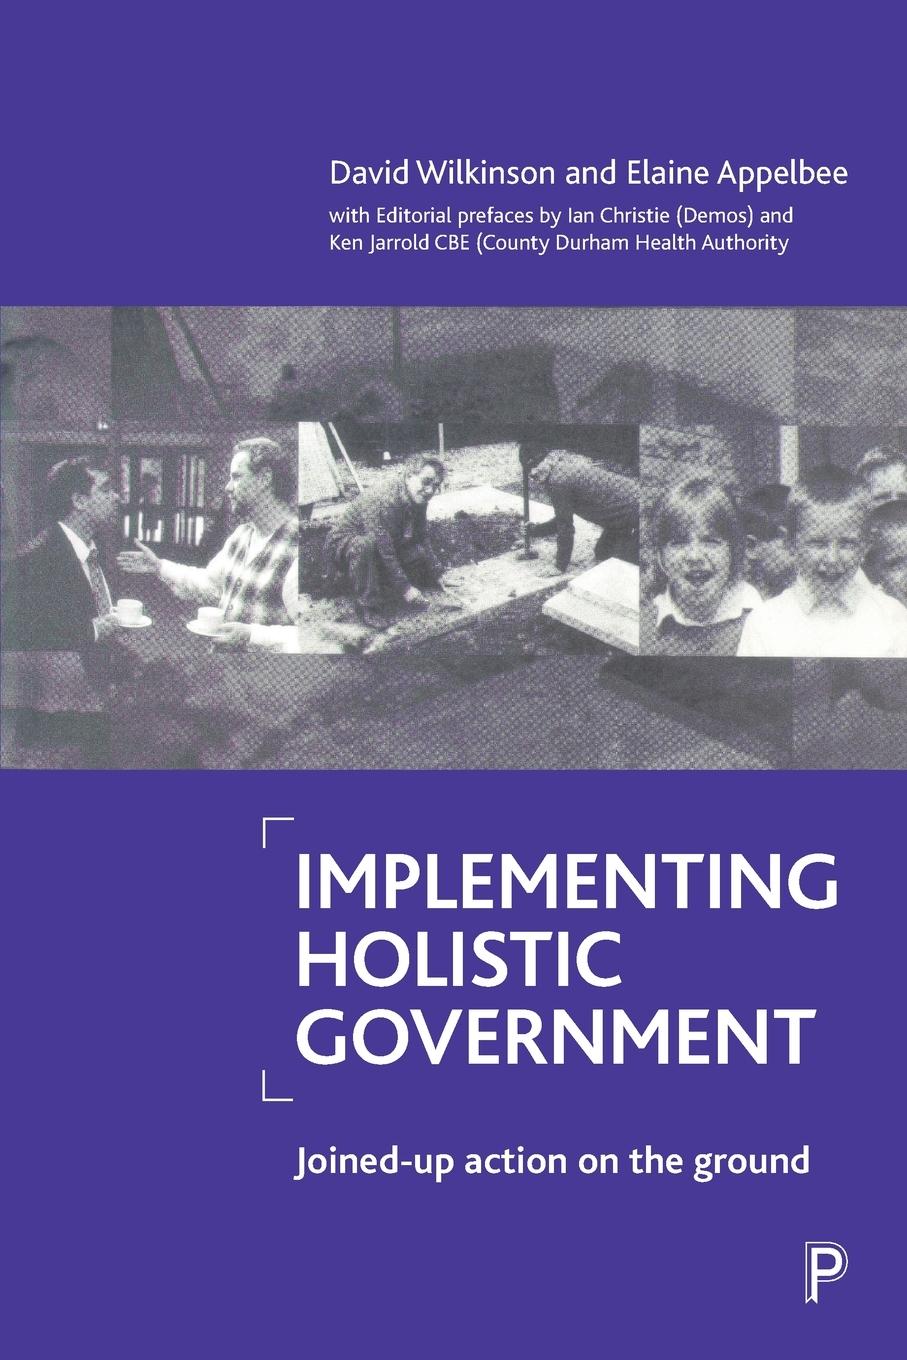 Implementing holistic government - Wilkinson, David Appelbee, Elaine